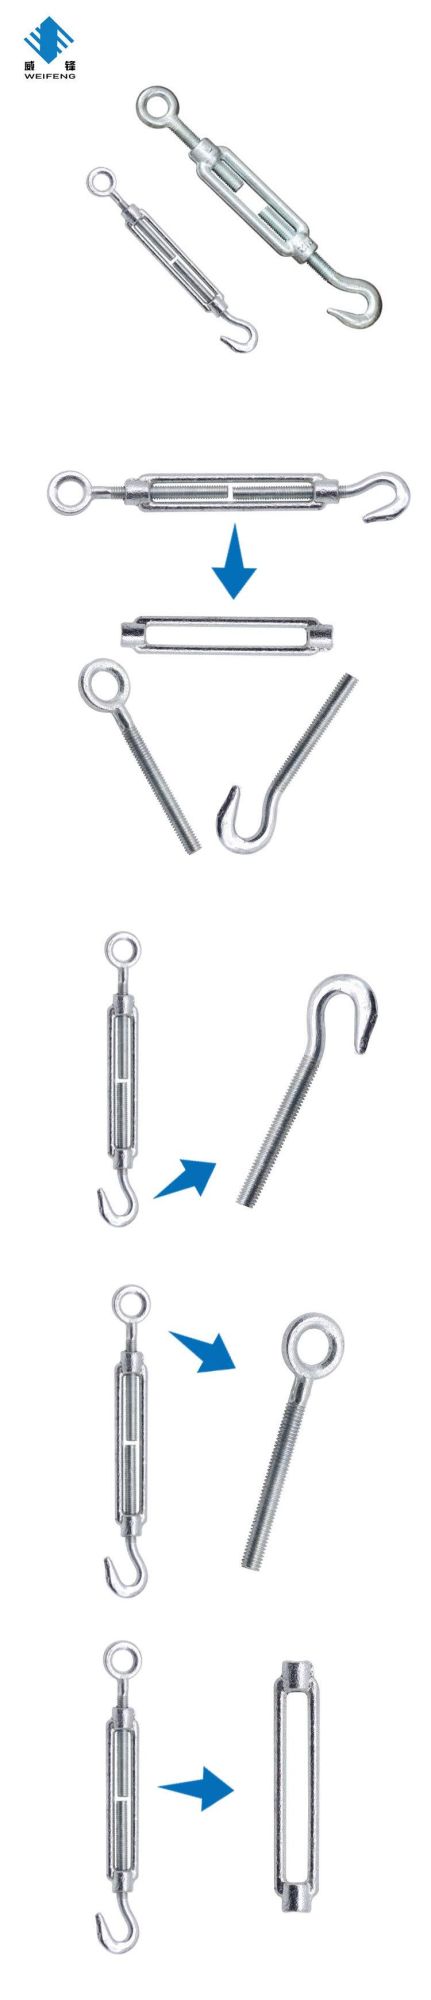 Galvanized Rigging Eye and Hook DIN1480 Turnbuckles